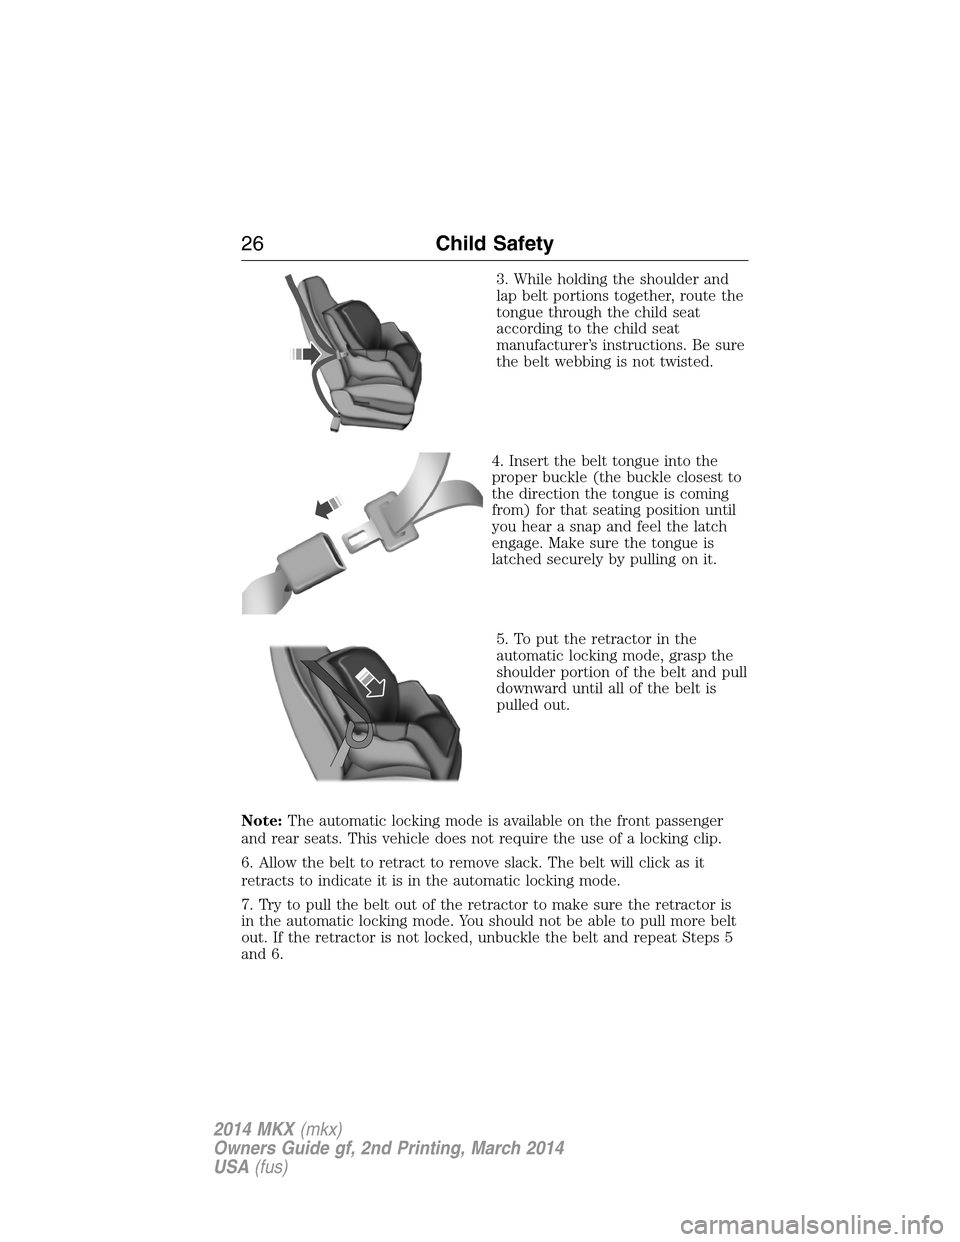 LINCOLN MKX 2014  Owners Manual 3. While holding the shoulder and
lap belt portions together, route the
tongue through the child seat
according to the child seat
manufacturer’s instructions. Be sure
the belt webbing is not twisted